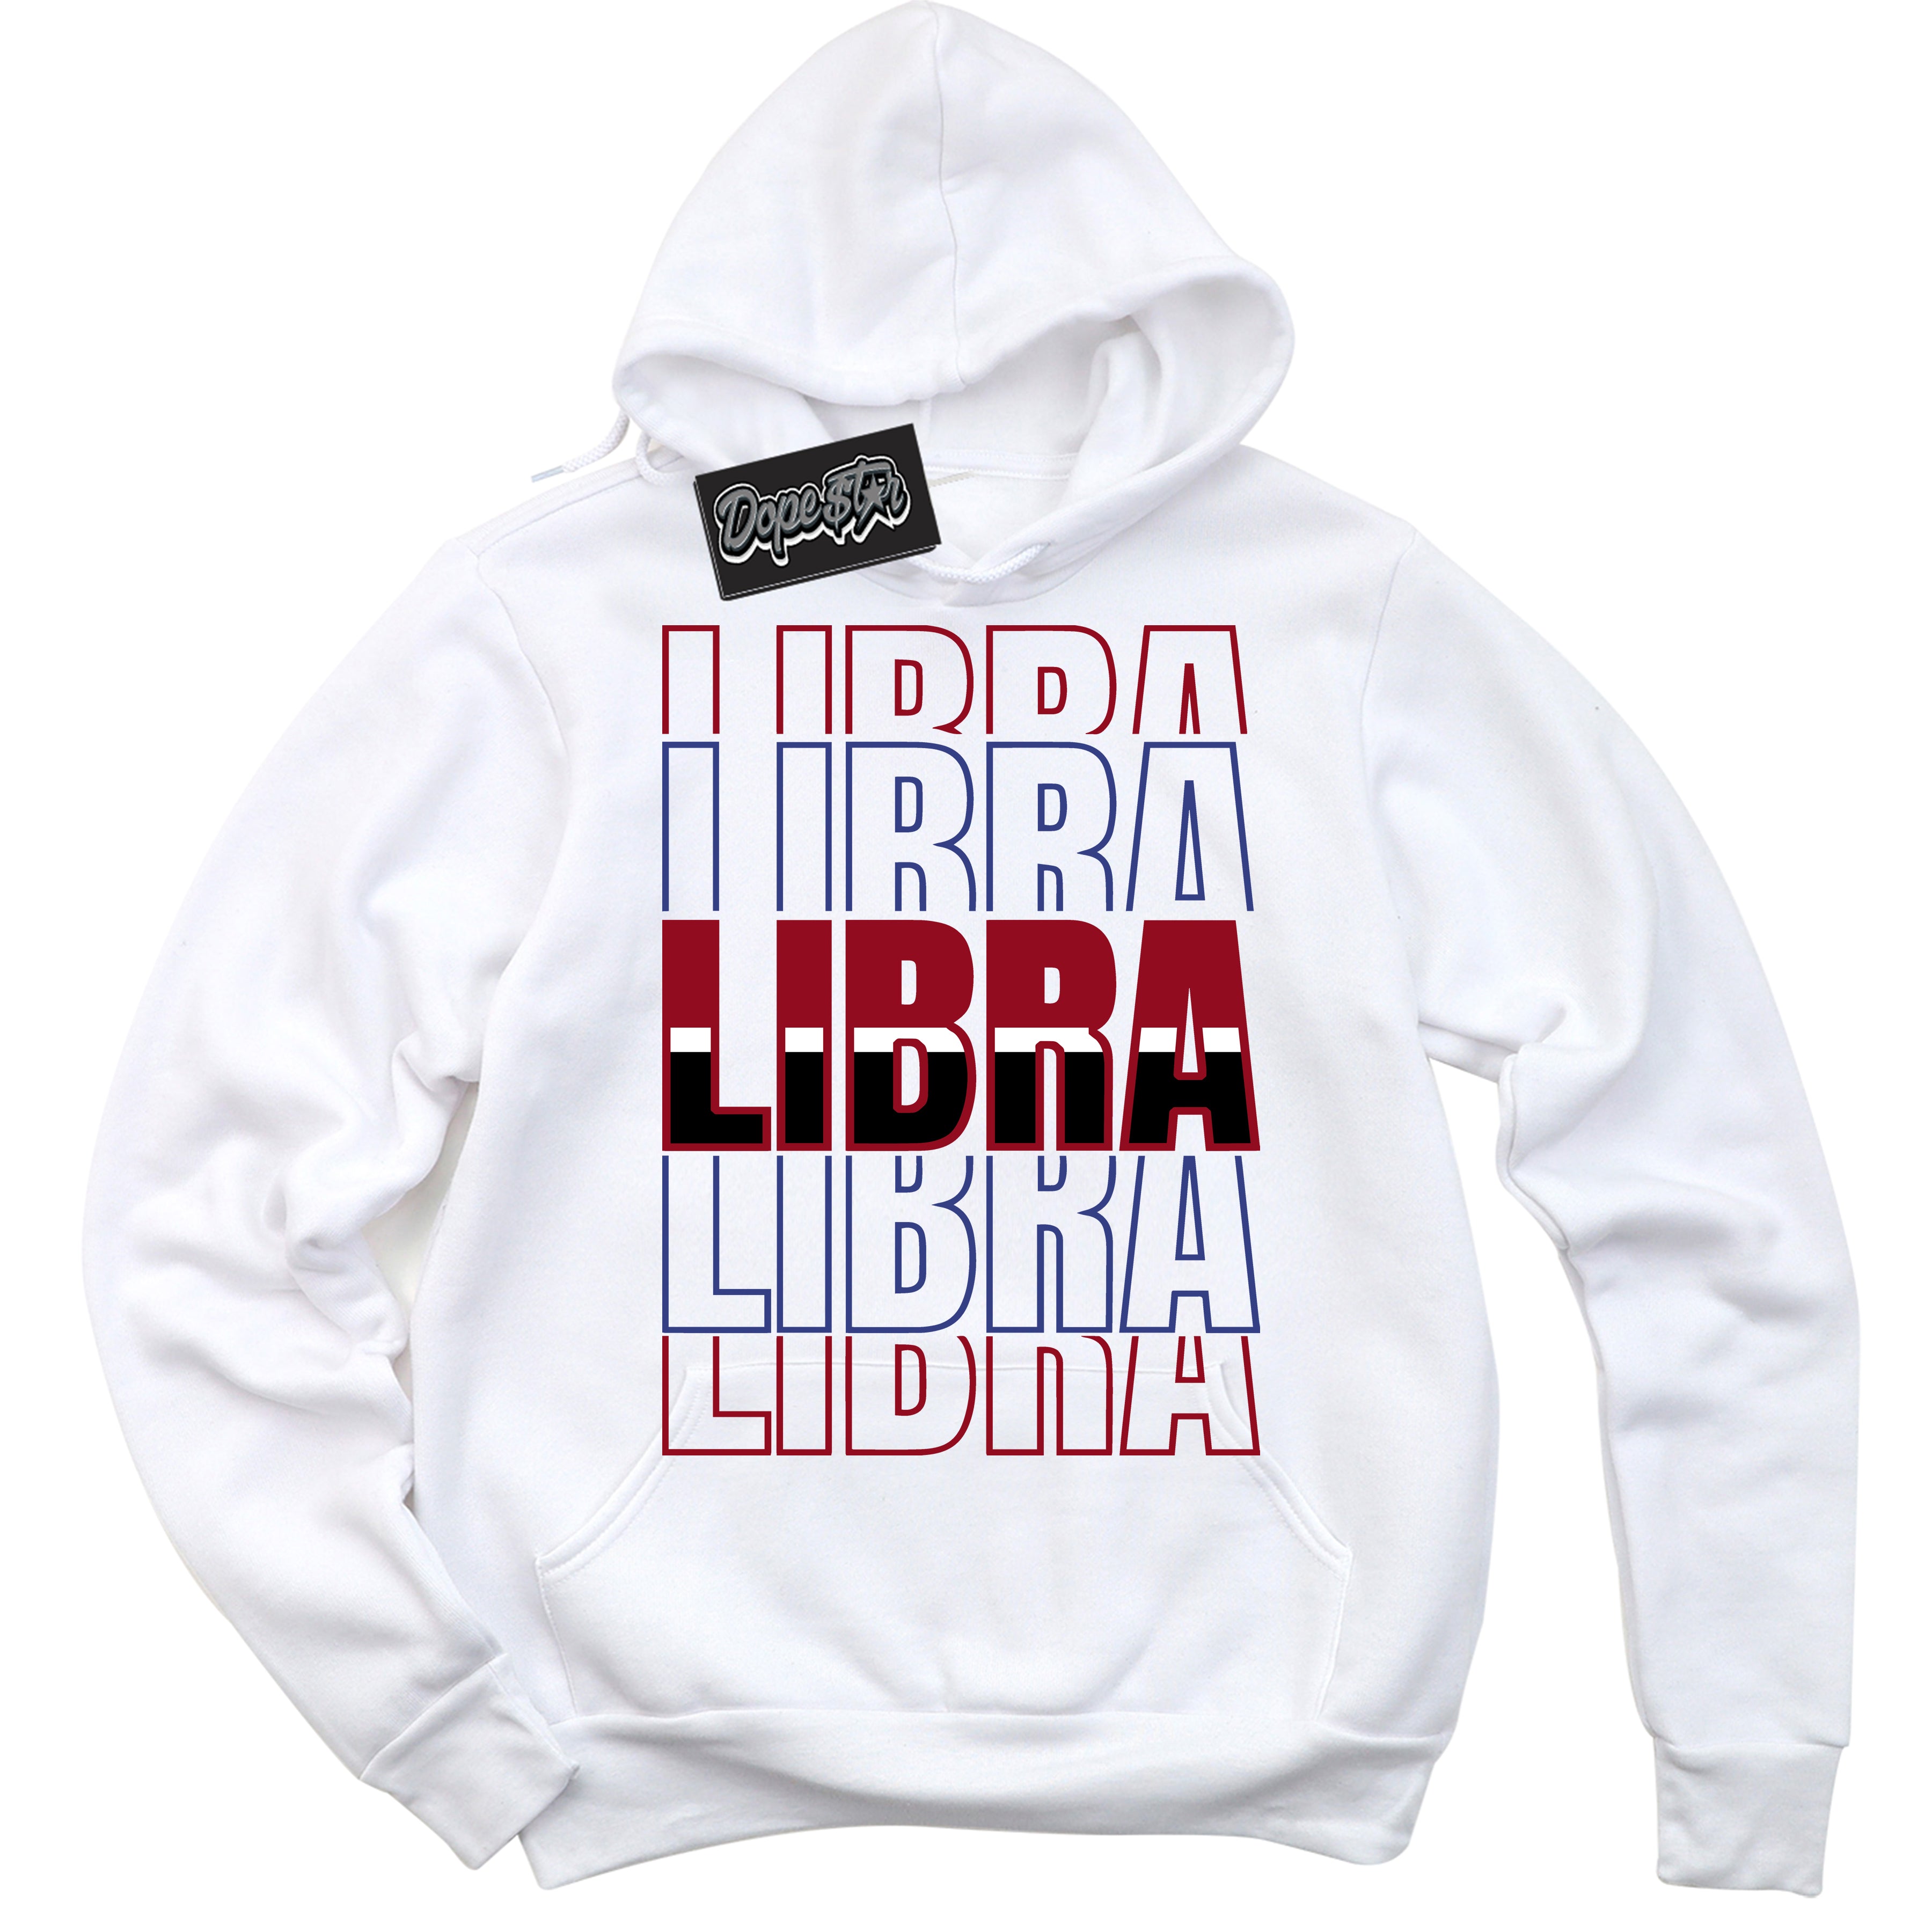 Cool White Hoodie with “ Libra ”  design that Perfectly Matches Playoffs 8s Sneakers.